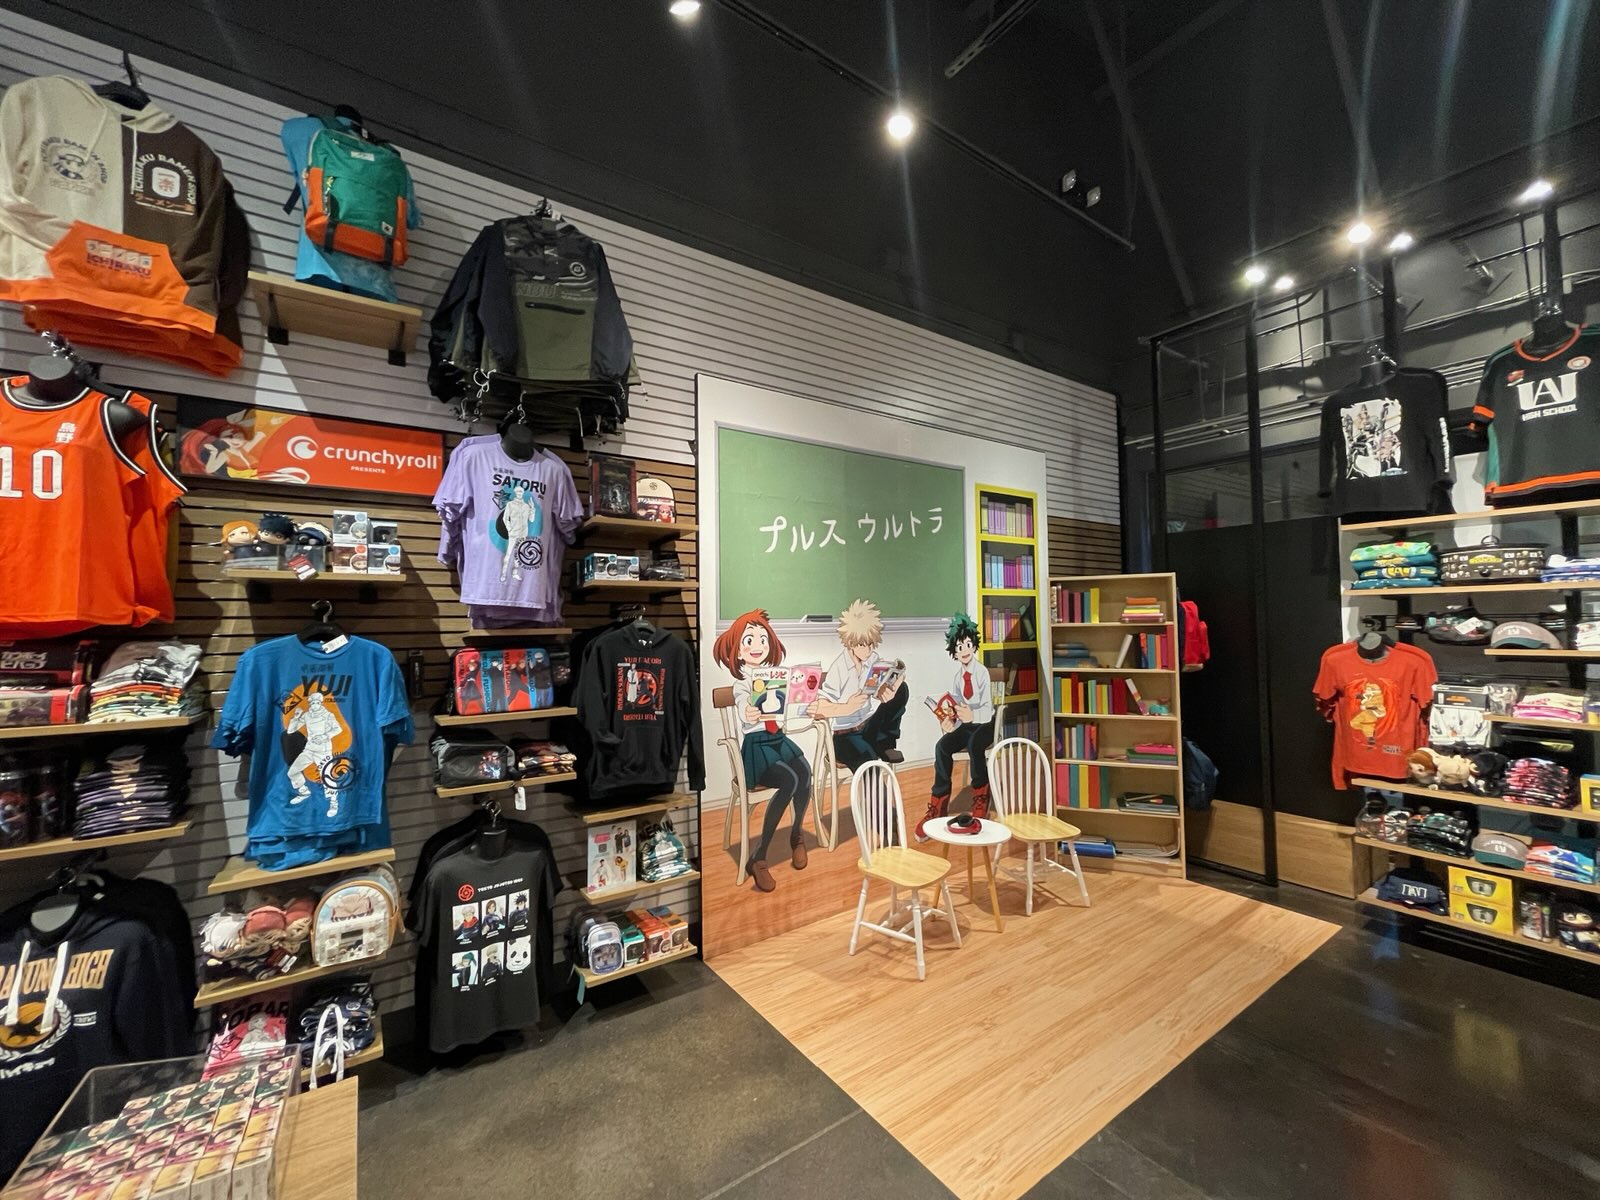 BoxLunch and Crunchyroll collaborate to bring in-store experiences